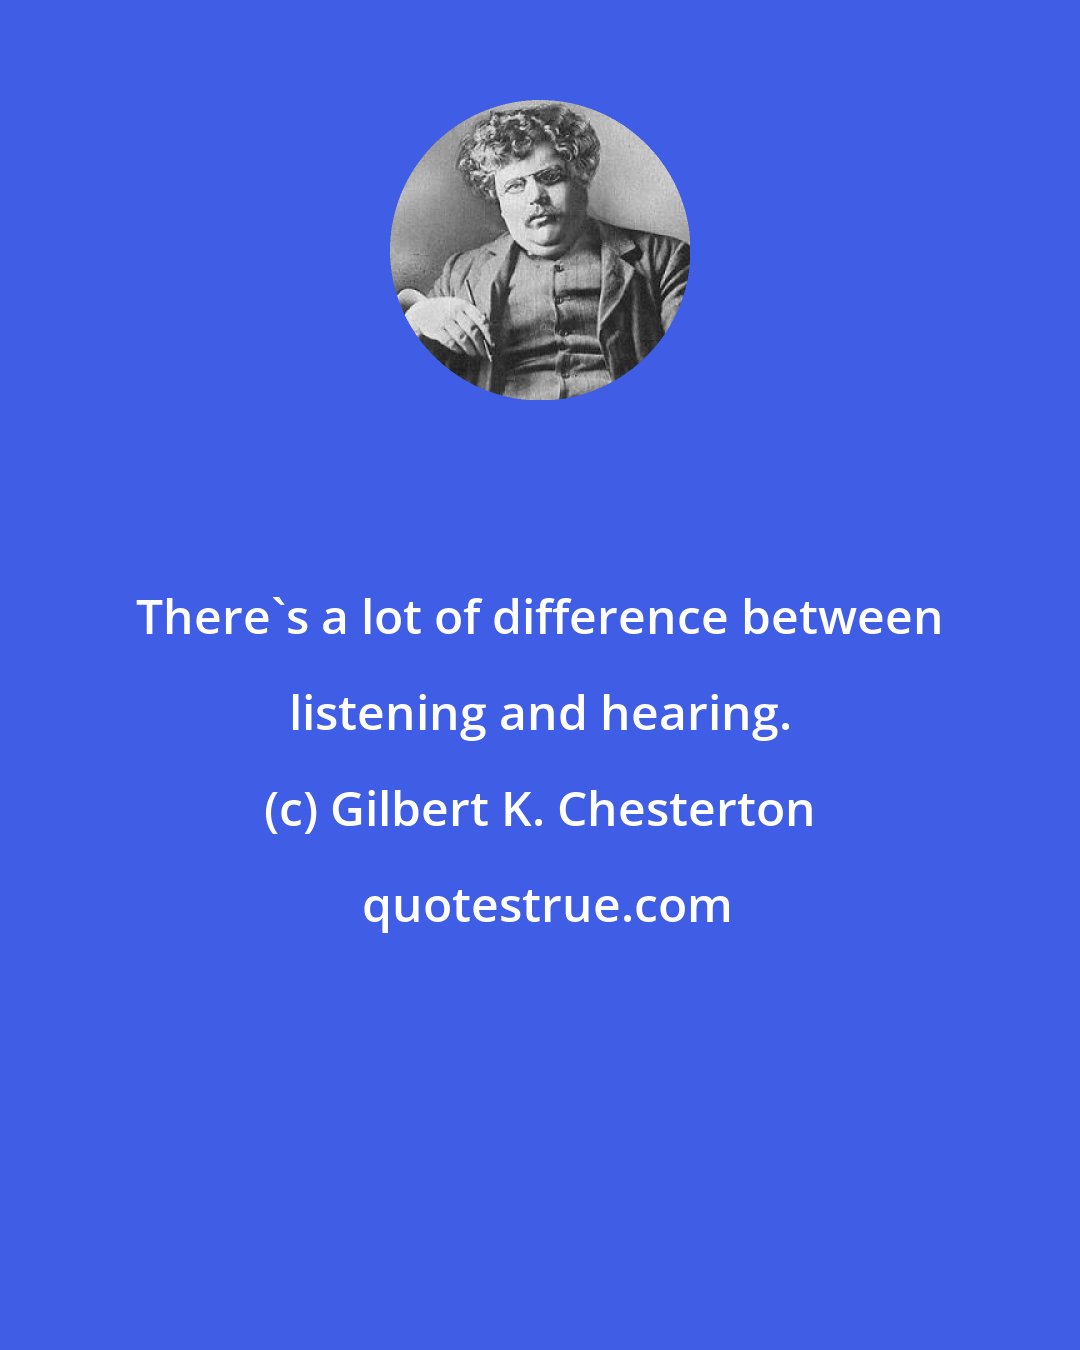 Gilbert K. Chesterton: There's a lot of difference between listening and hearing.